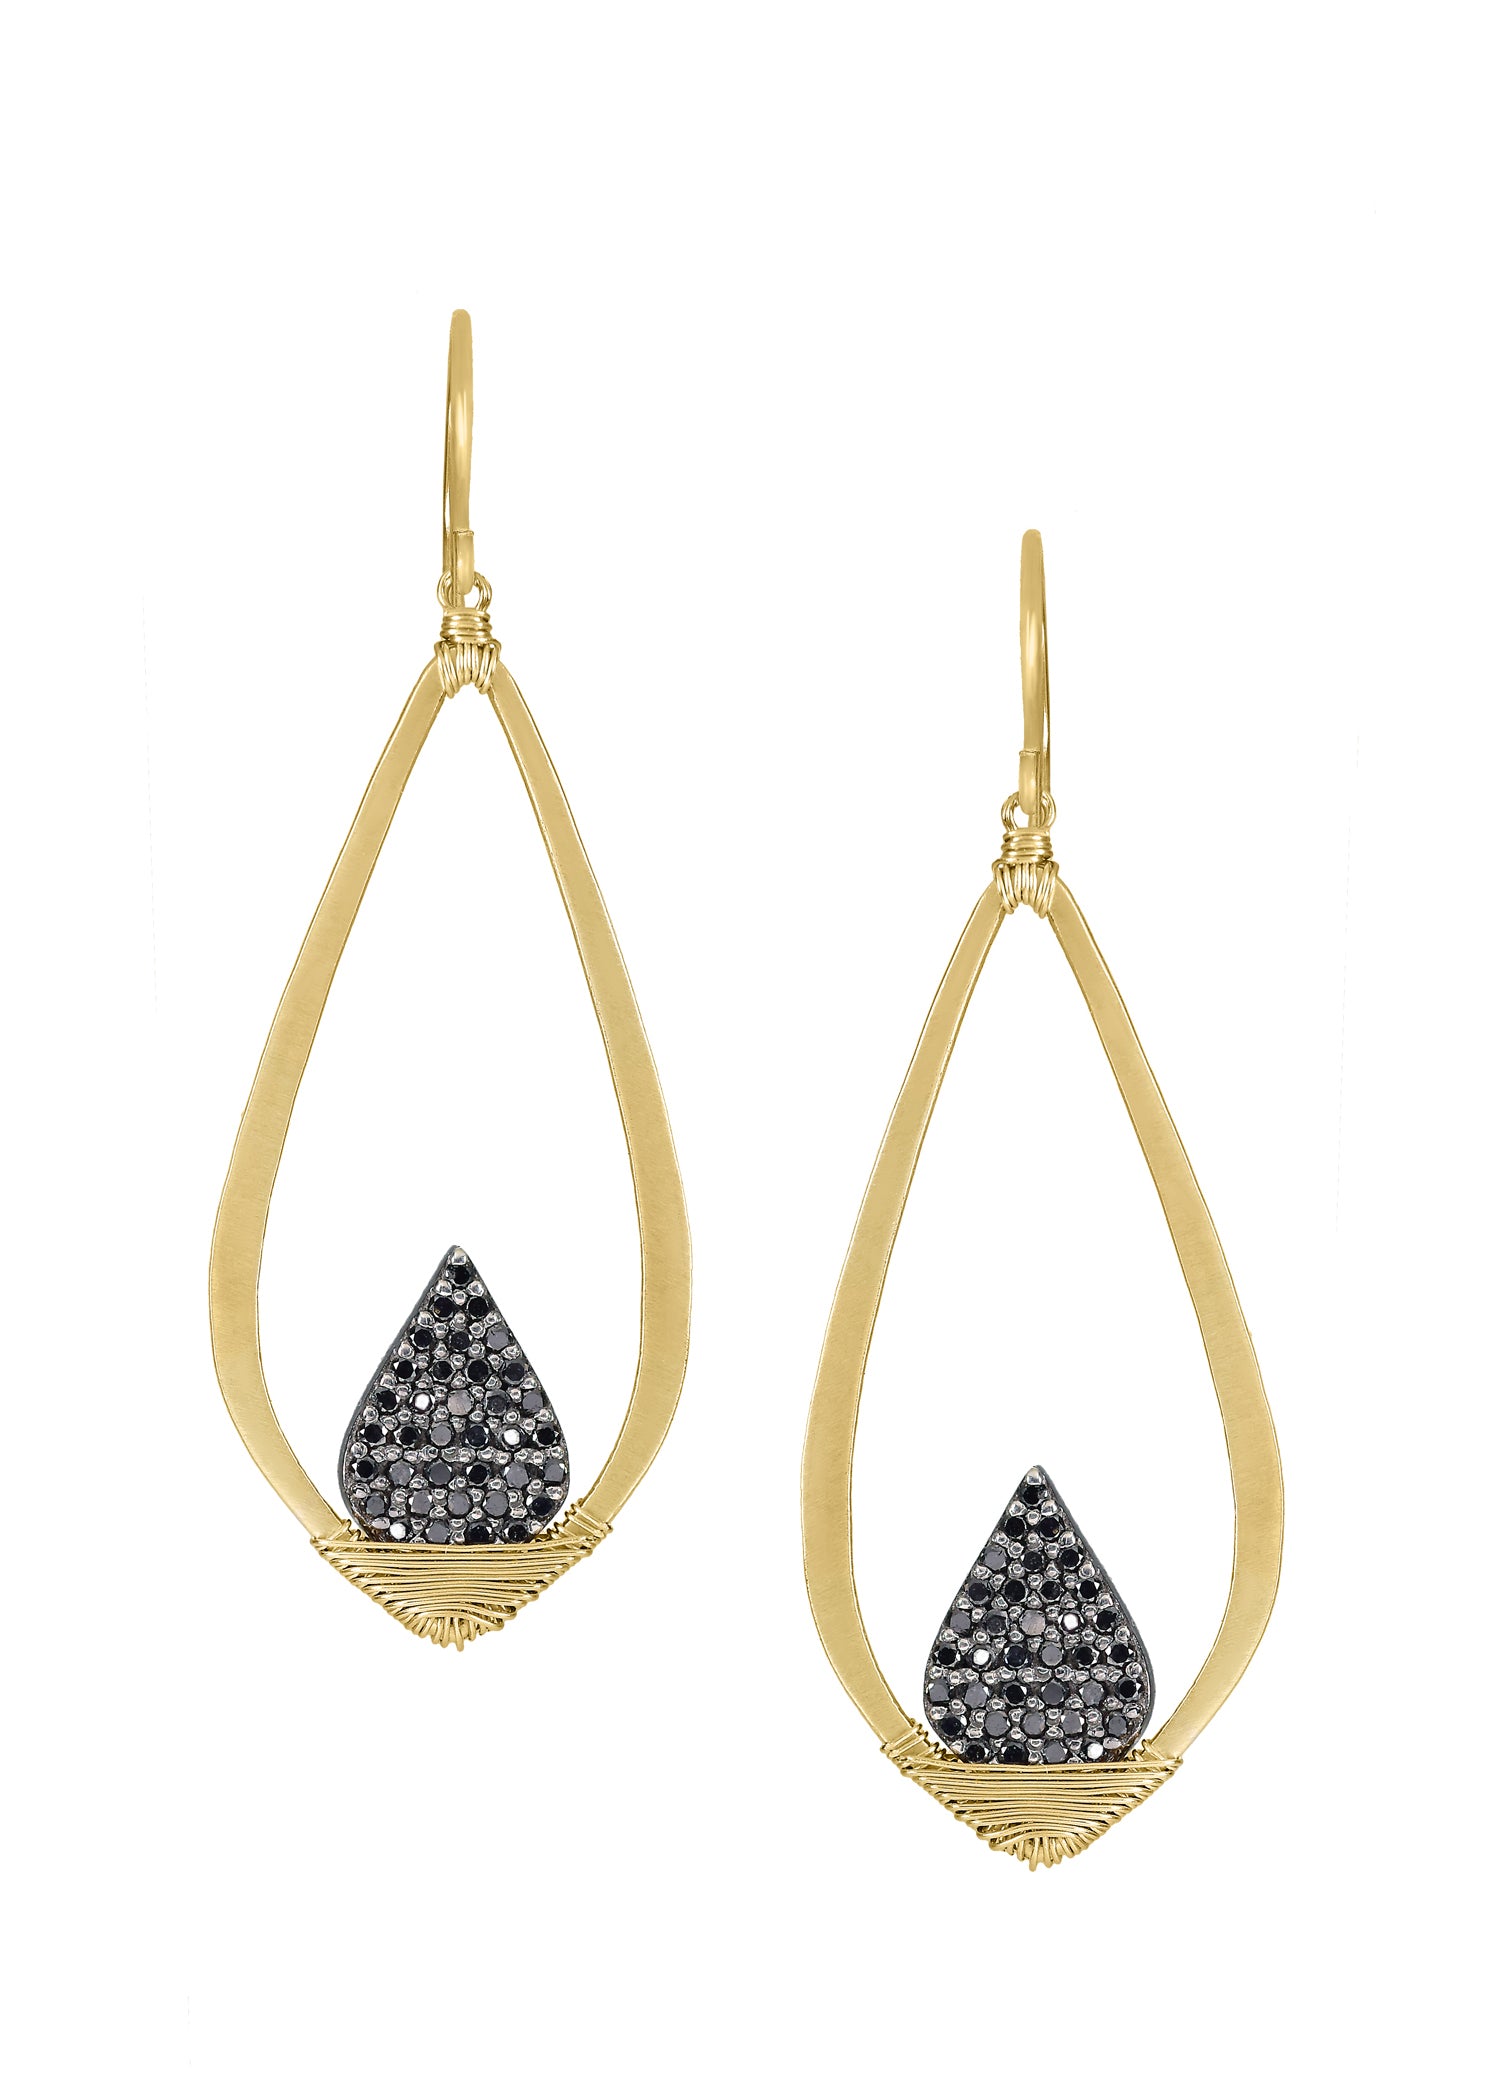 Black diamond 14k gold Sterling silver Mixed metal Earrings measure 1-7/8" in length (including the ear wires) and 5/8" in width at the widest point Special order only Handmade in our Los Angeles studio